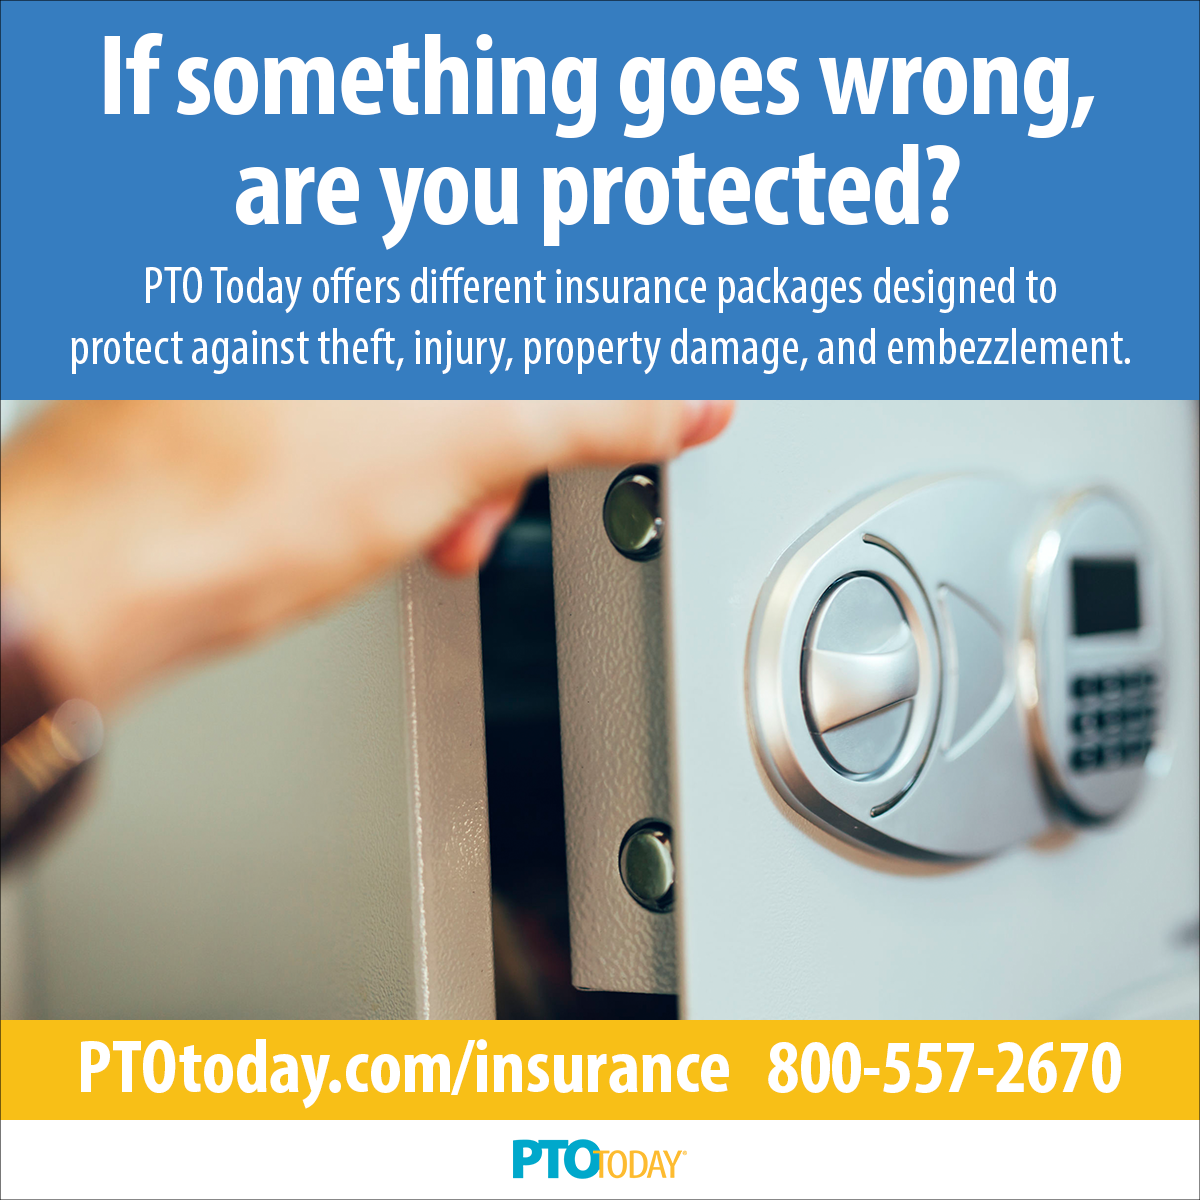 Protect Your Group With Insurance From PTO Today